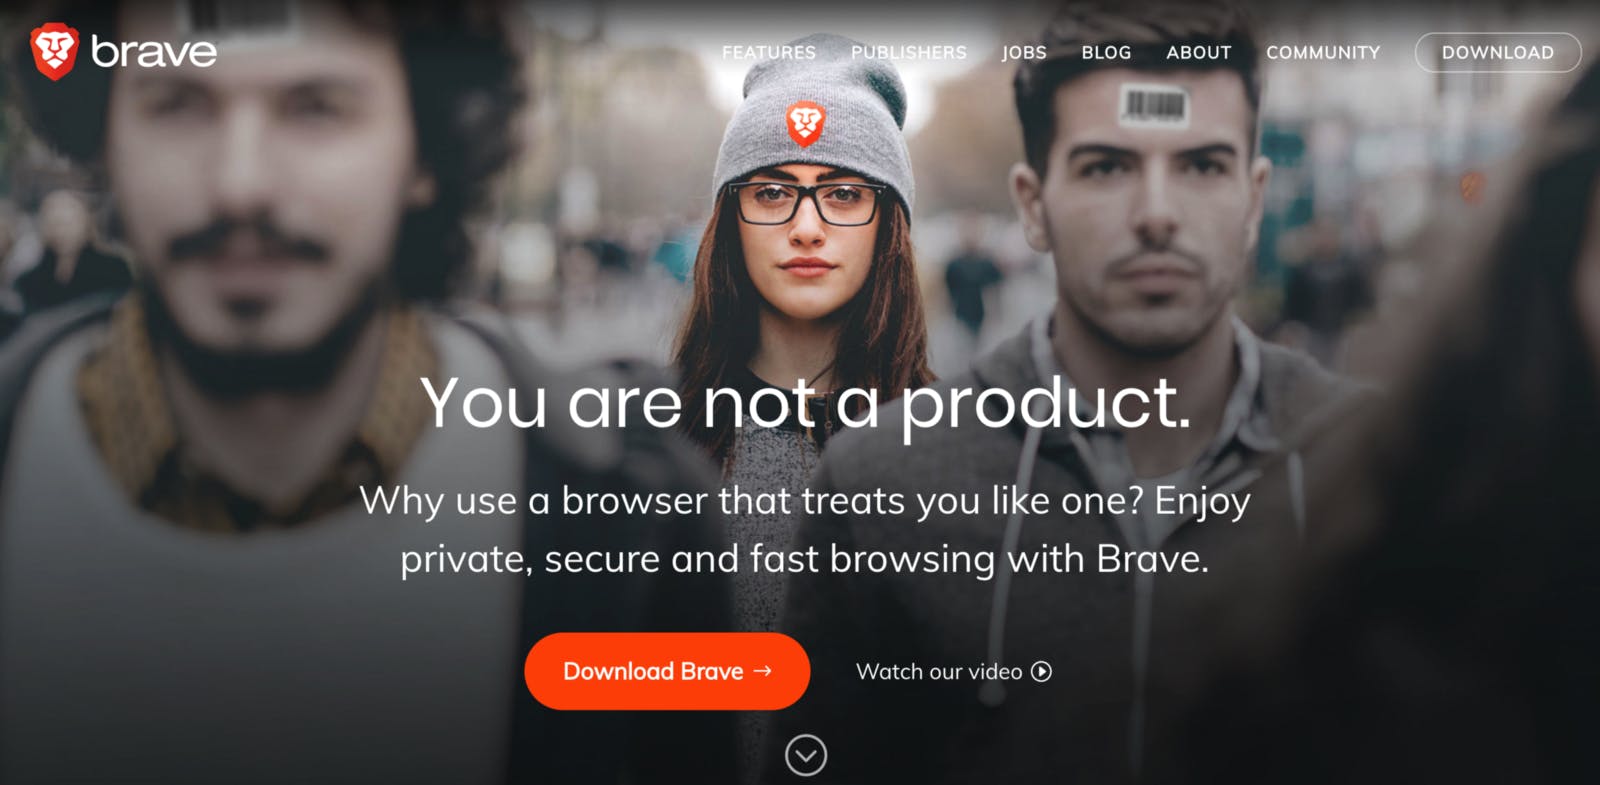 featured image - Brave Browser is taking the web by storm